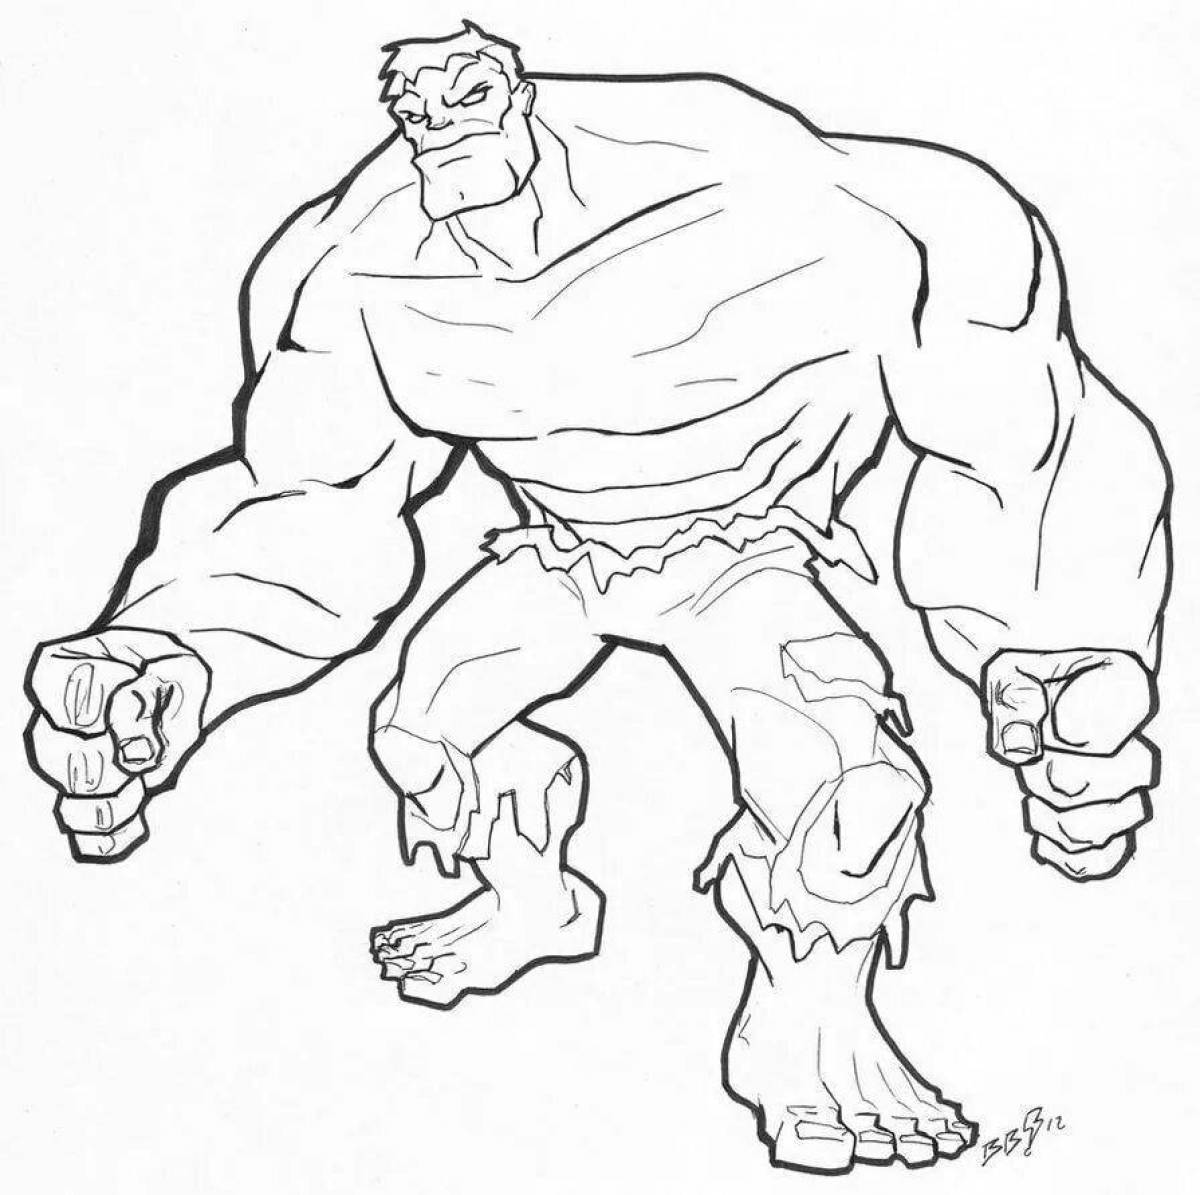 Exclusive coloring page of the hulk